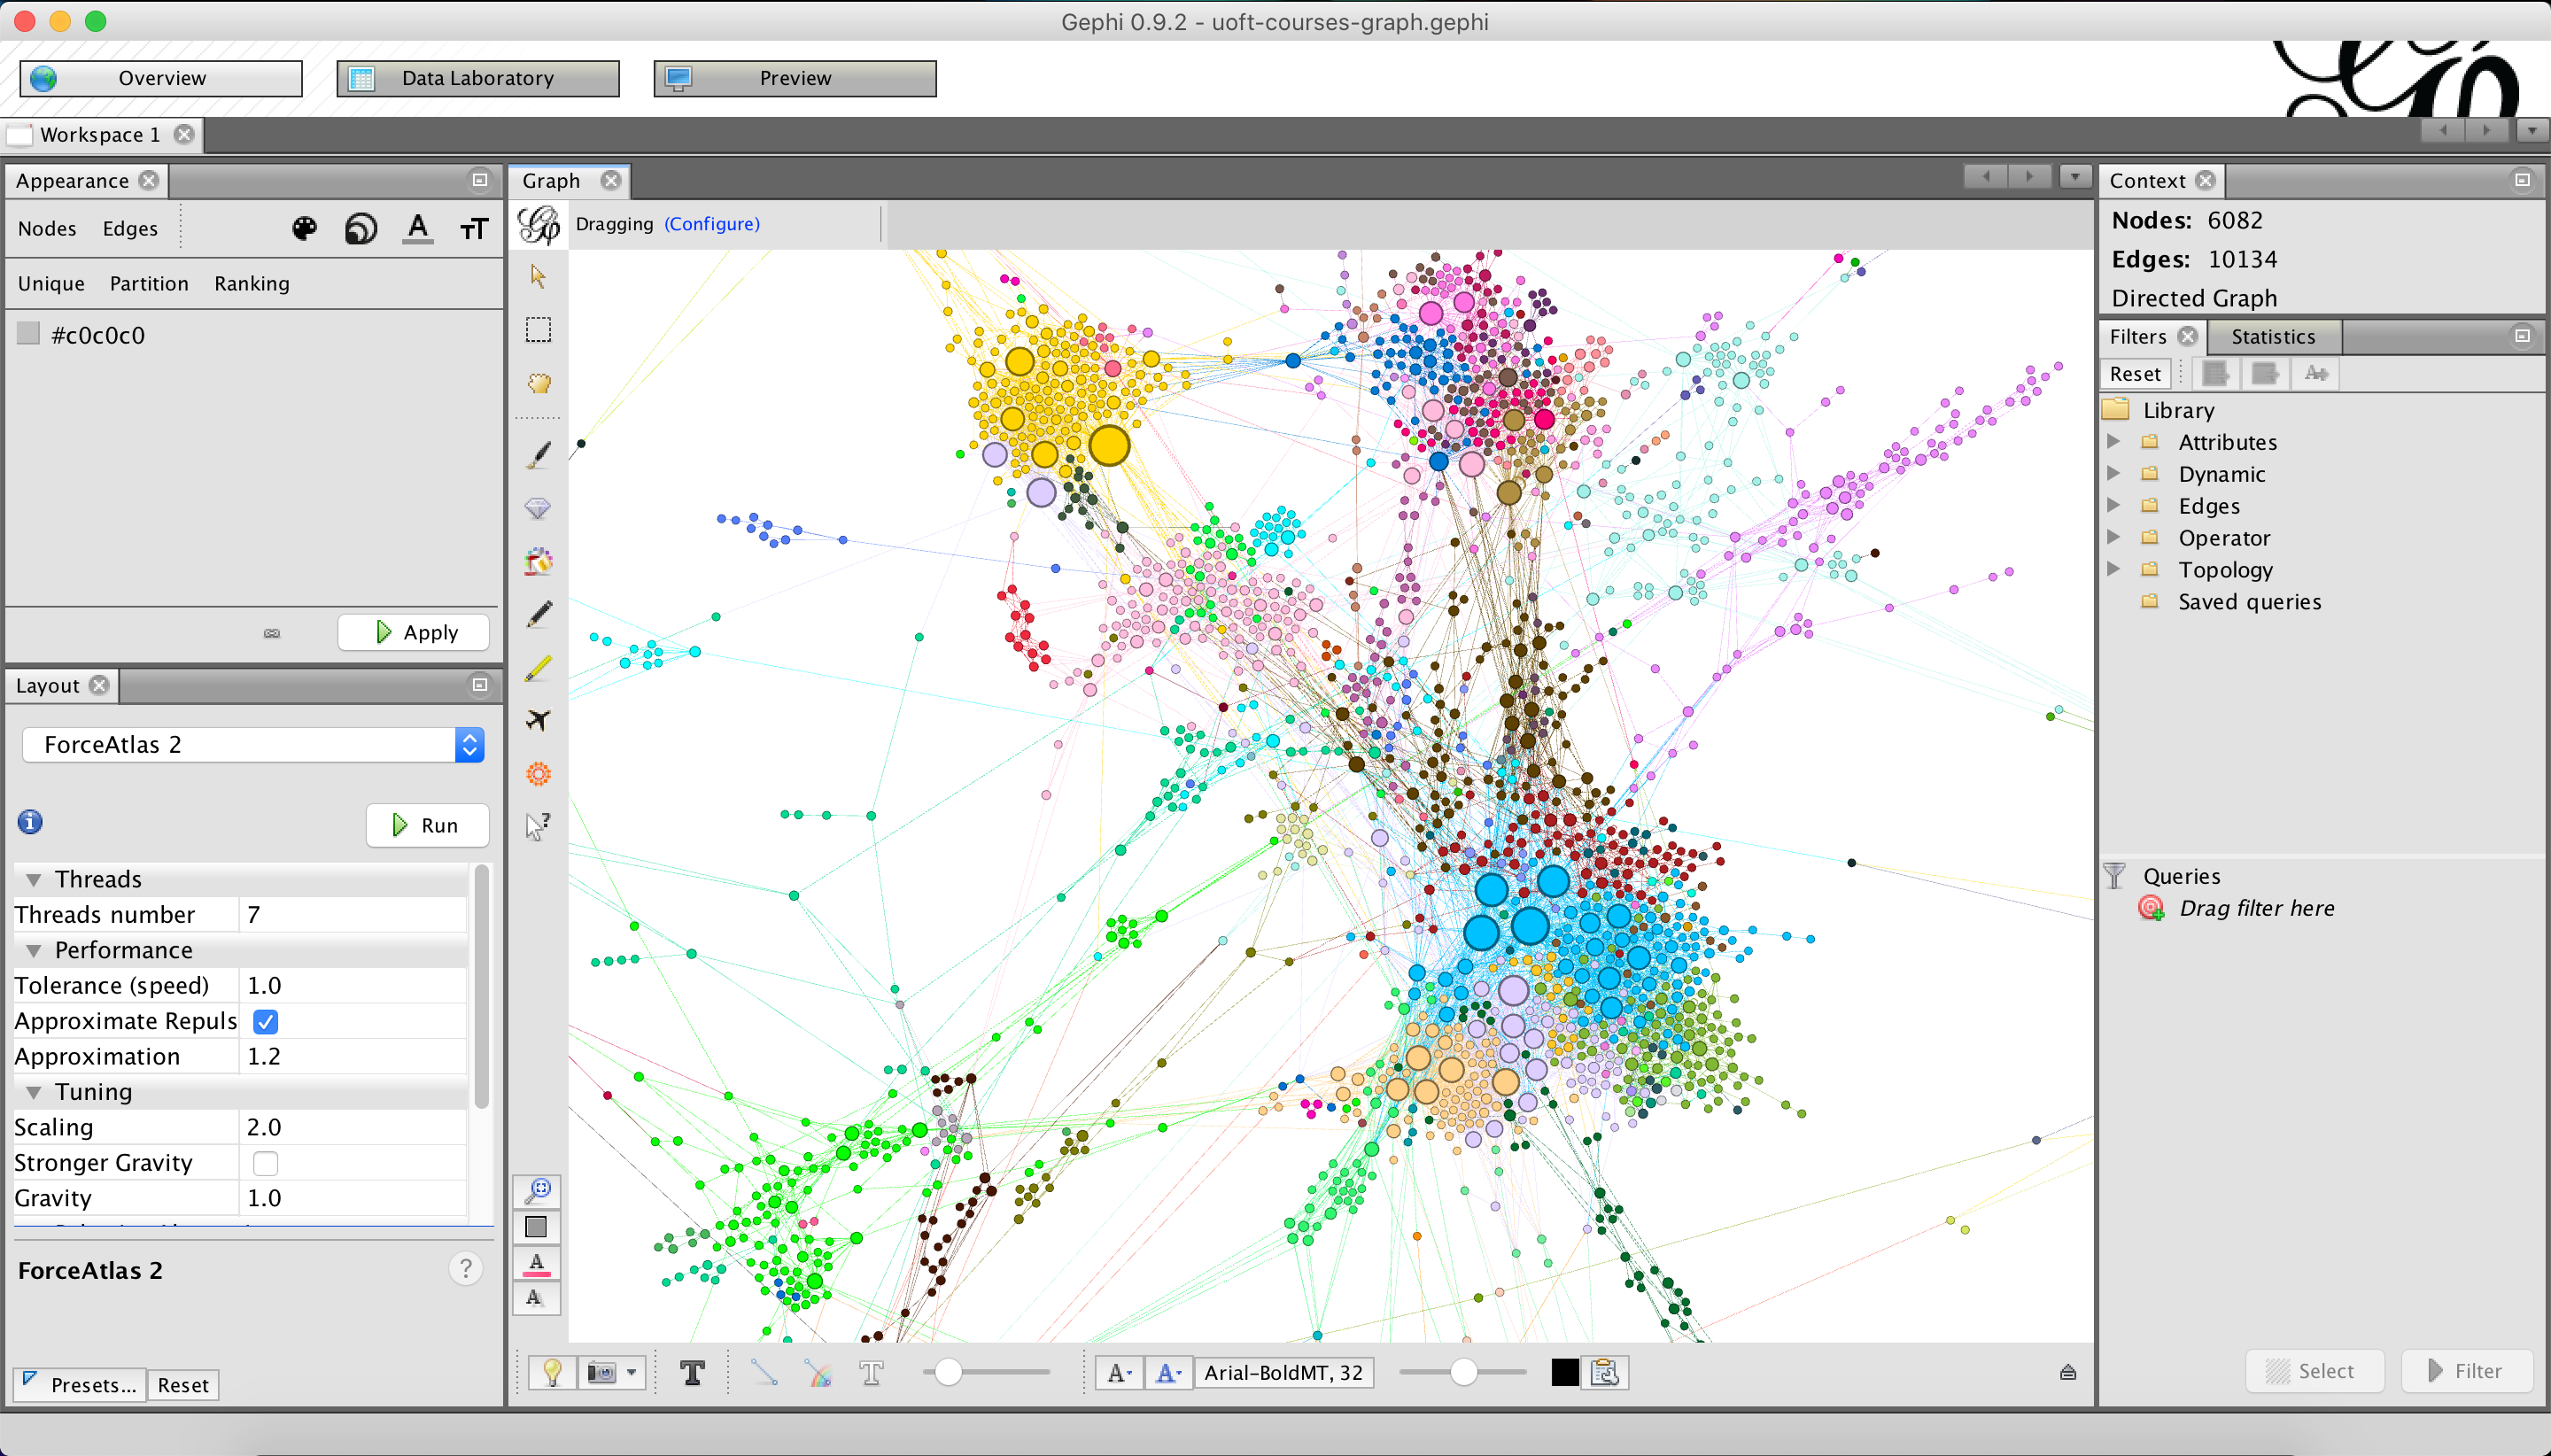 UofT Course Graph in Gephi